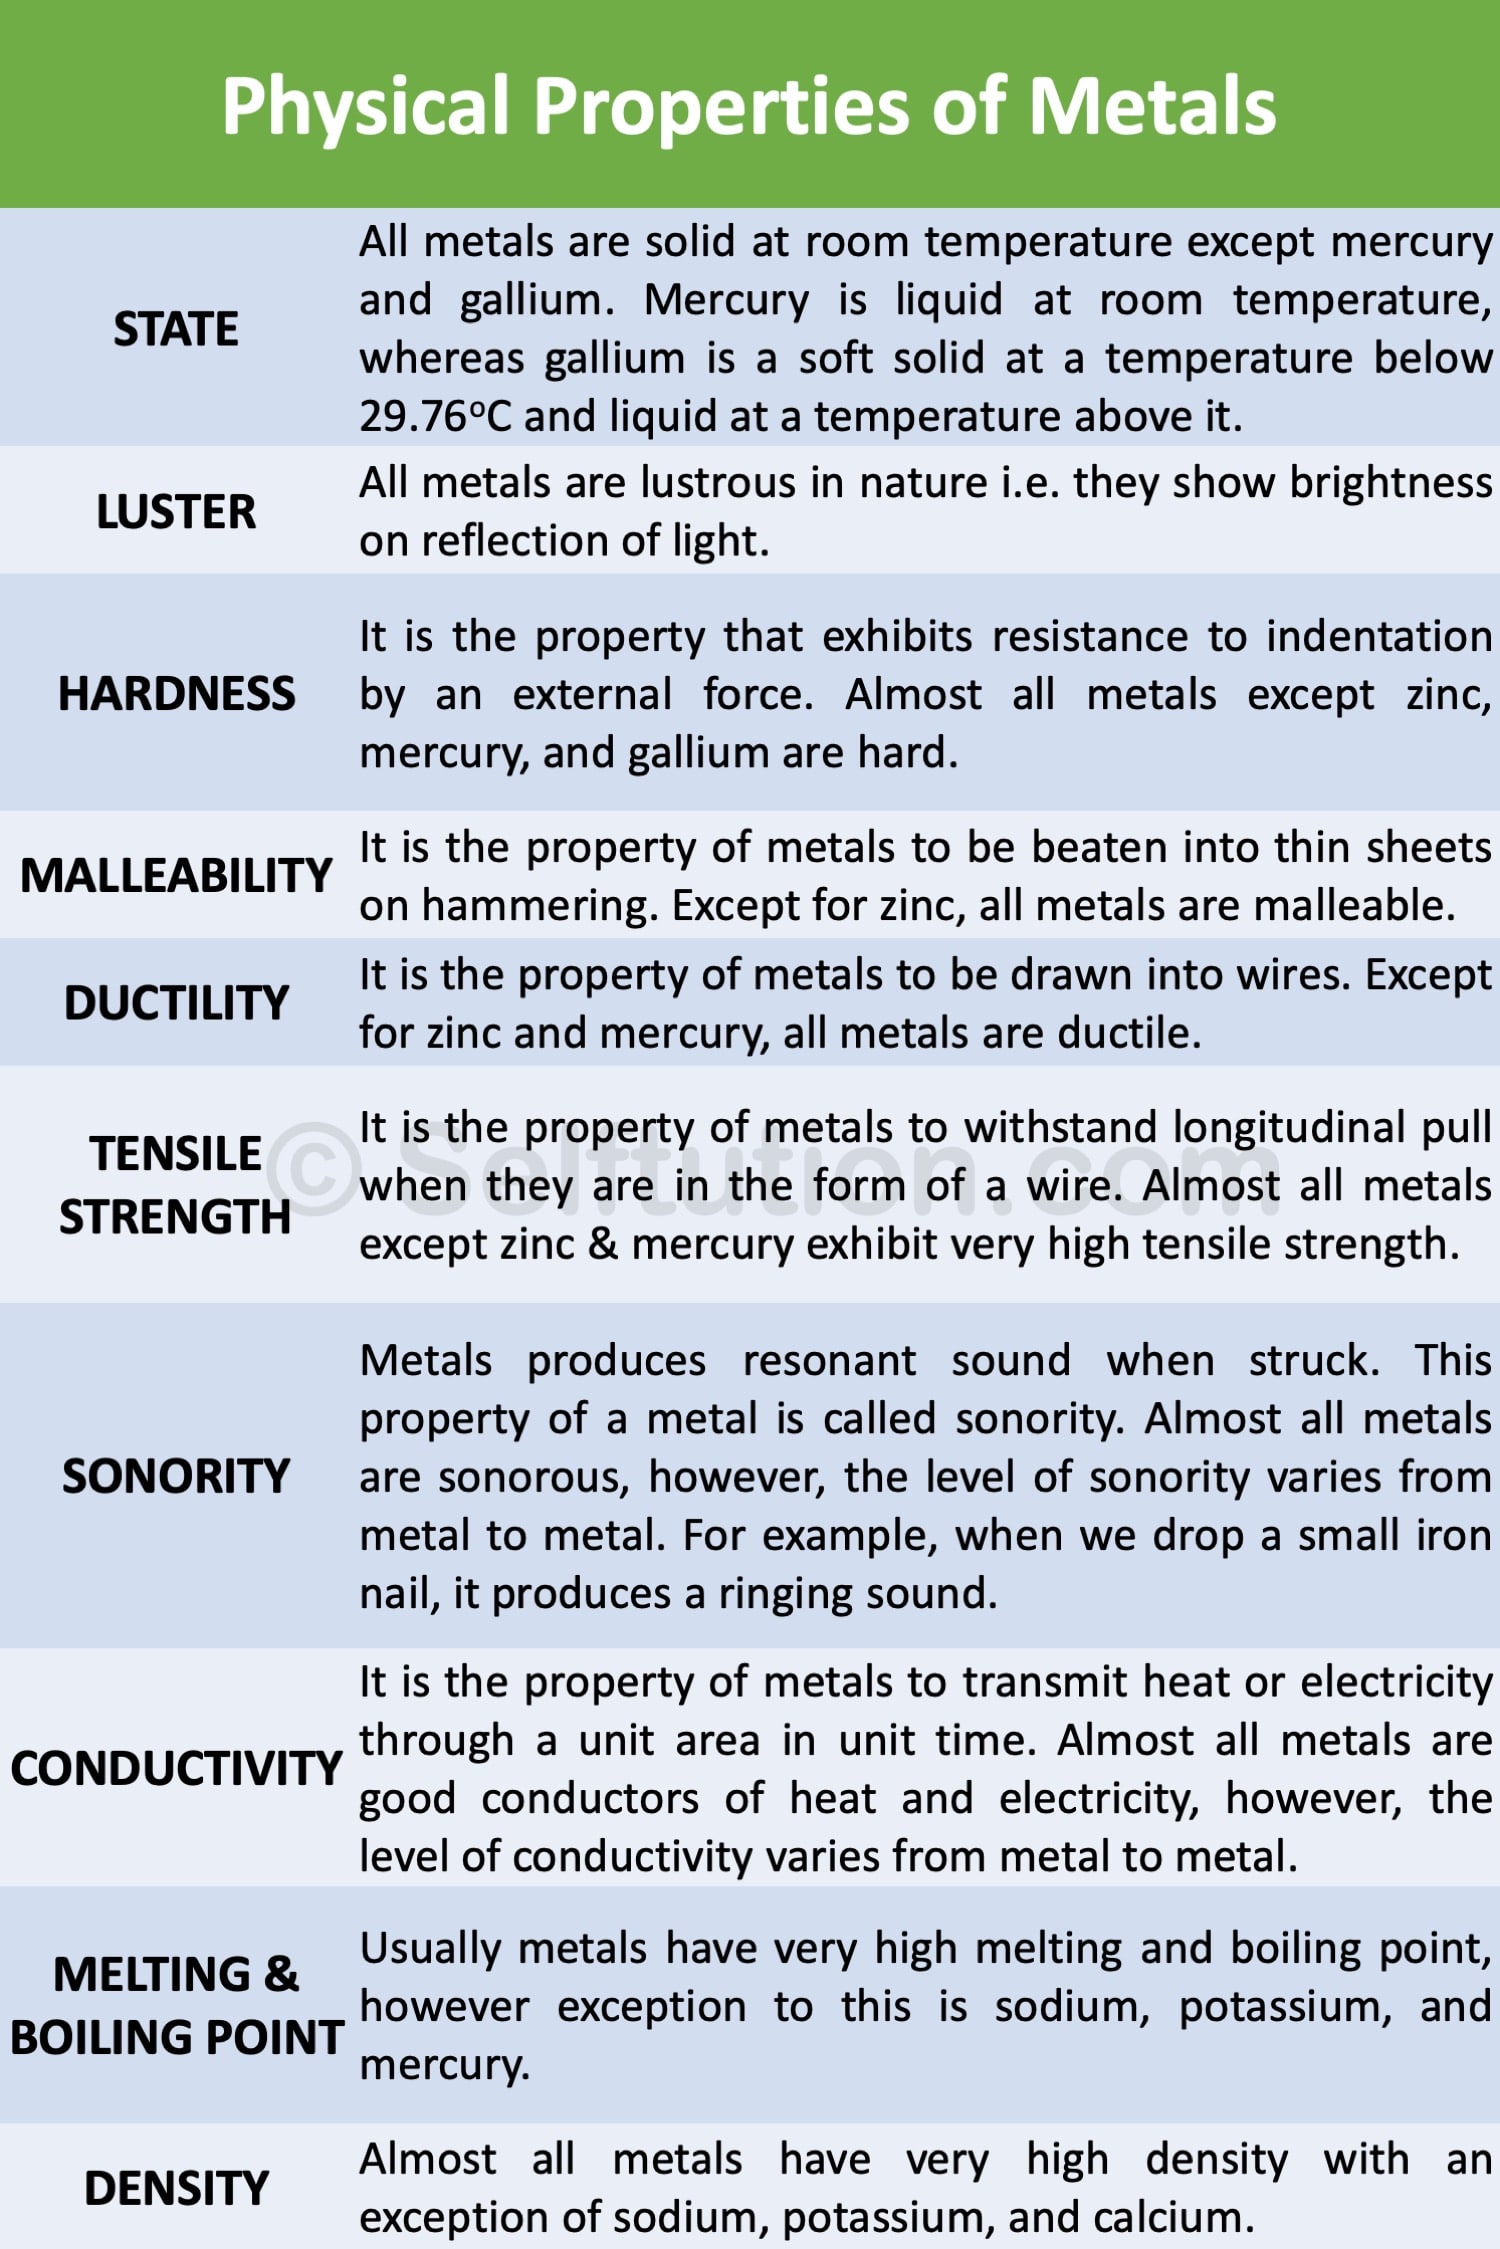 Physical Properties of Metals